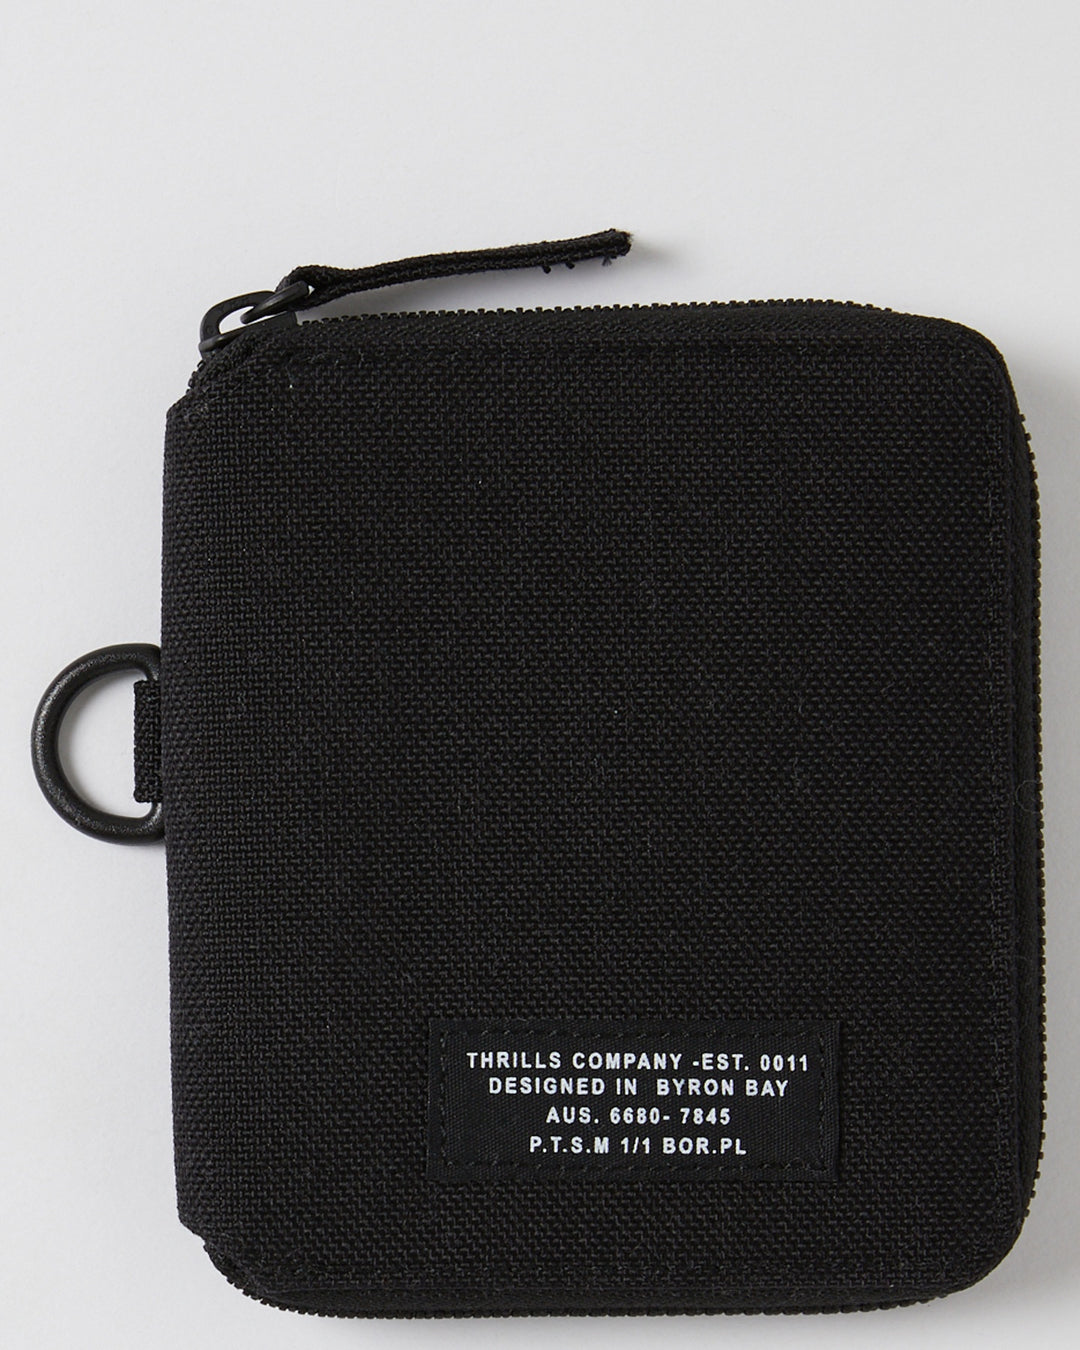 Military Small Pouch - Black